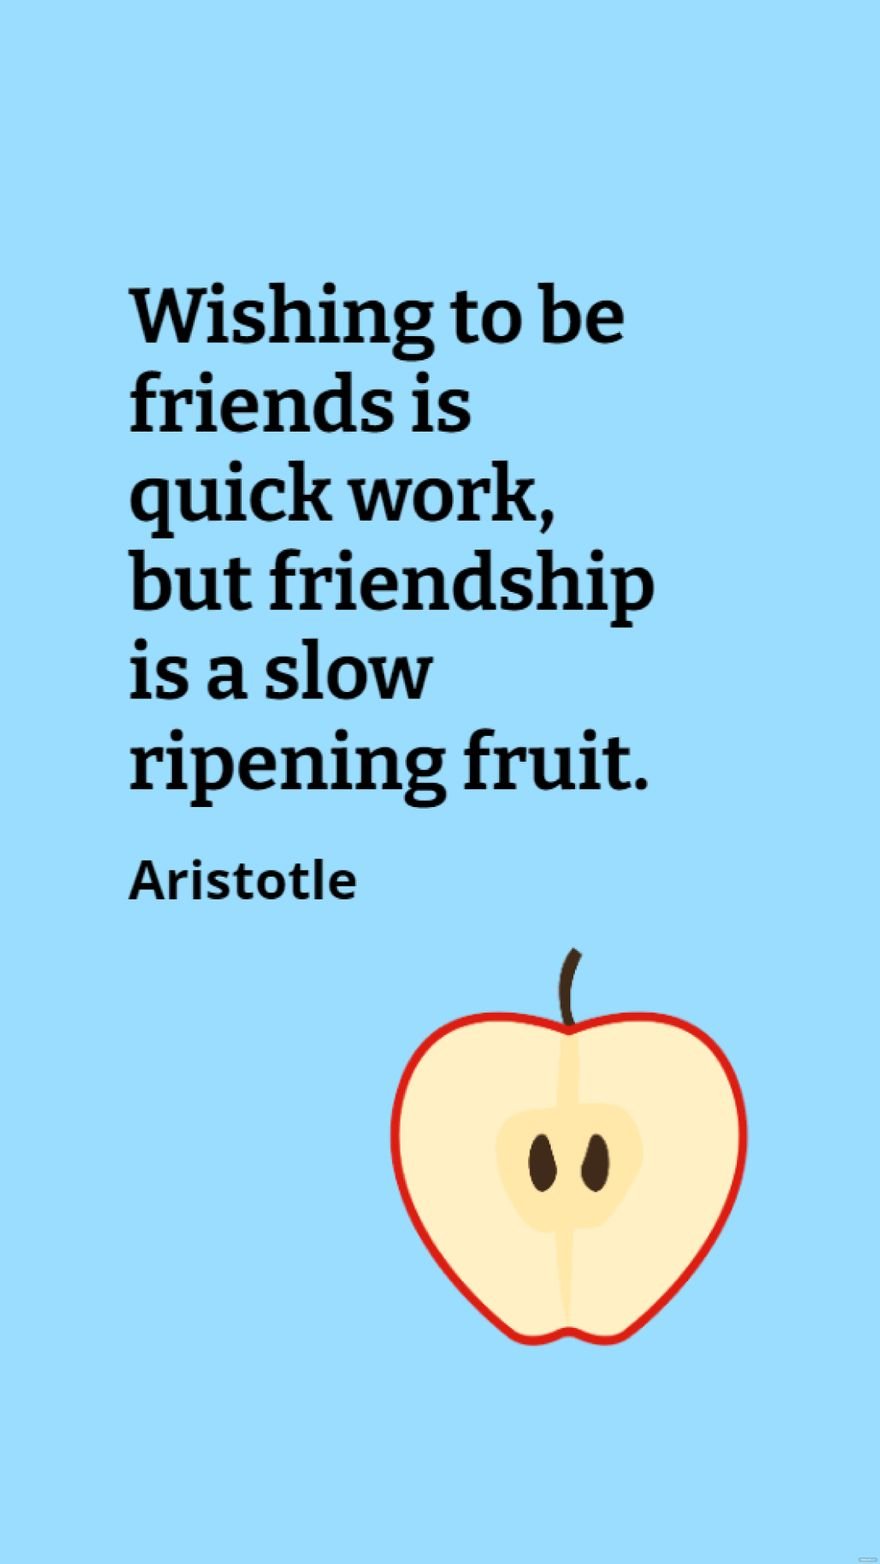 Free Aristotle - Wishing to be friends is quick work, but friendship is a slow ripening fruit. in JPG